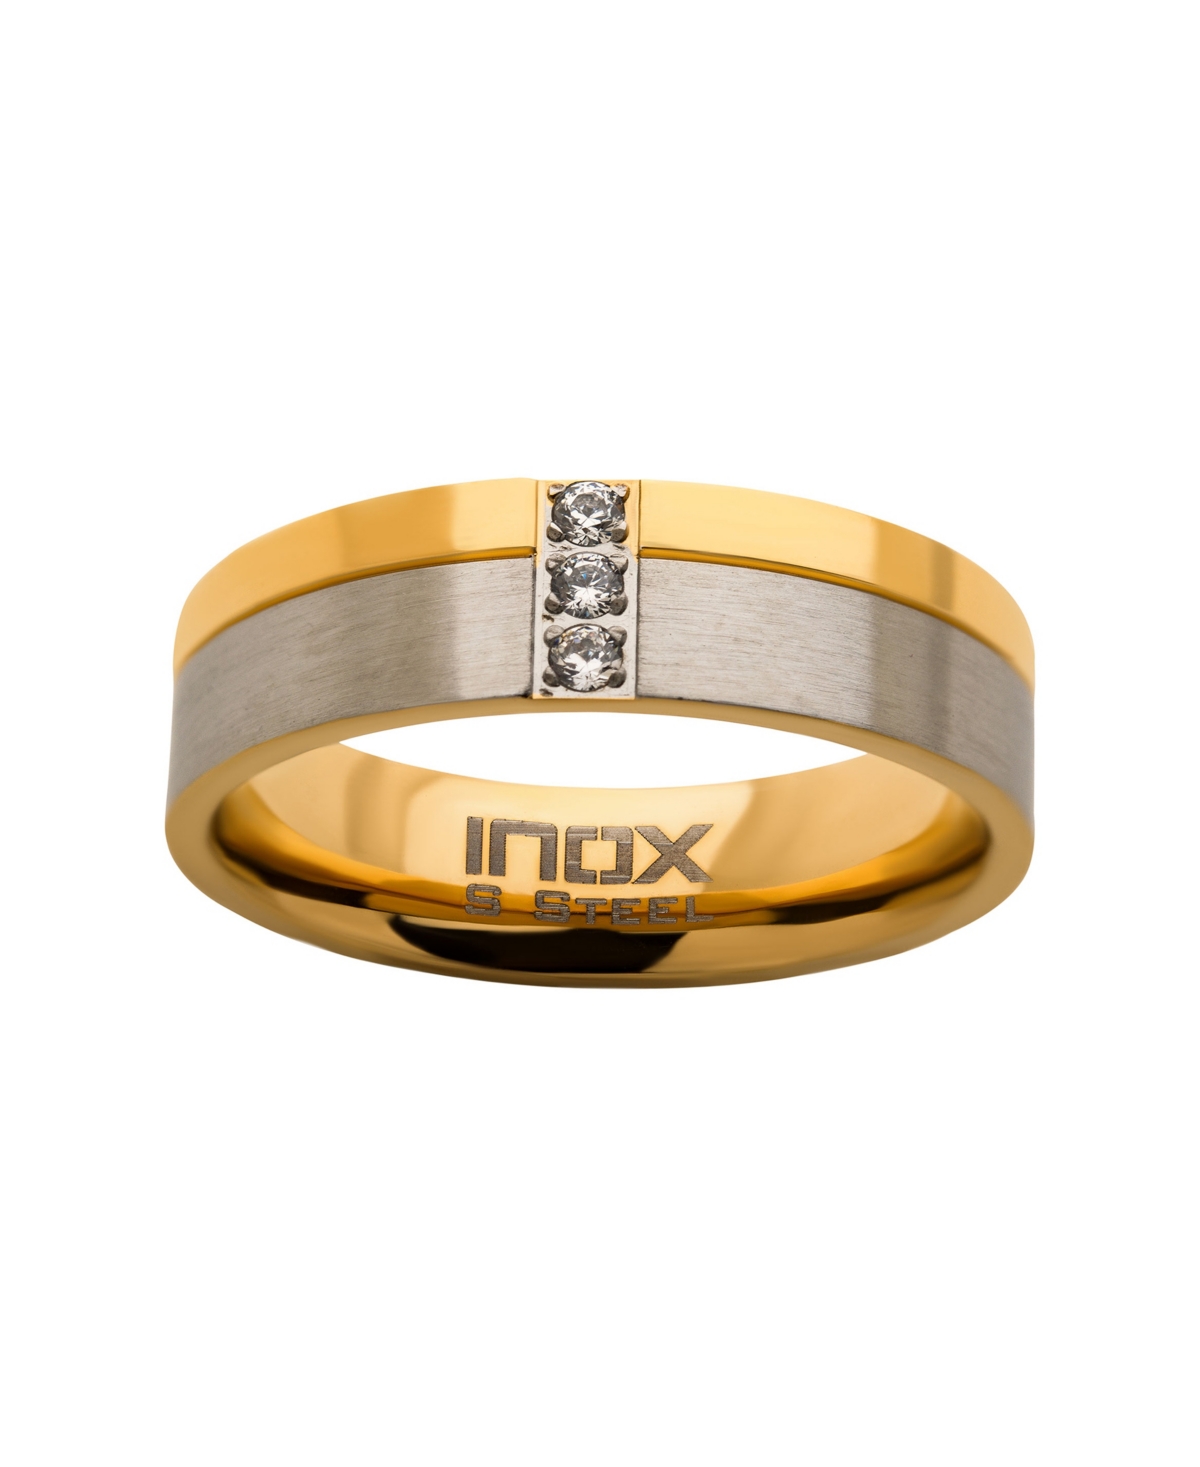 Inox Men's Steel Gold-Tone Plated 3 Piece Clear Diamond Ring